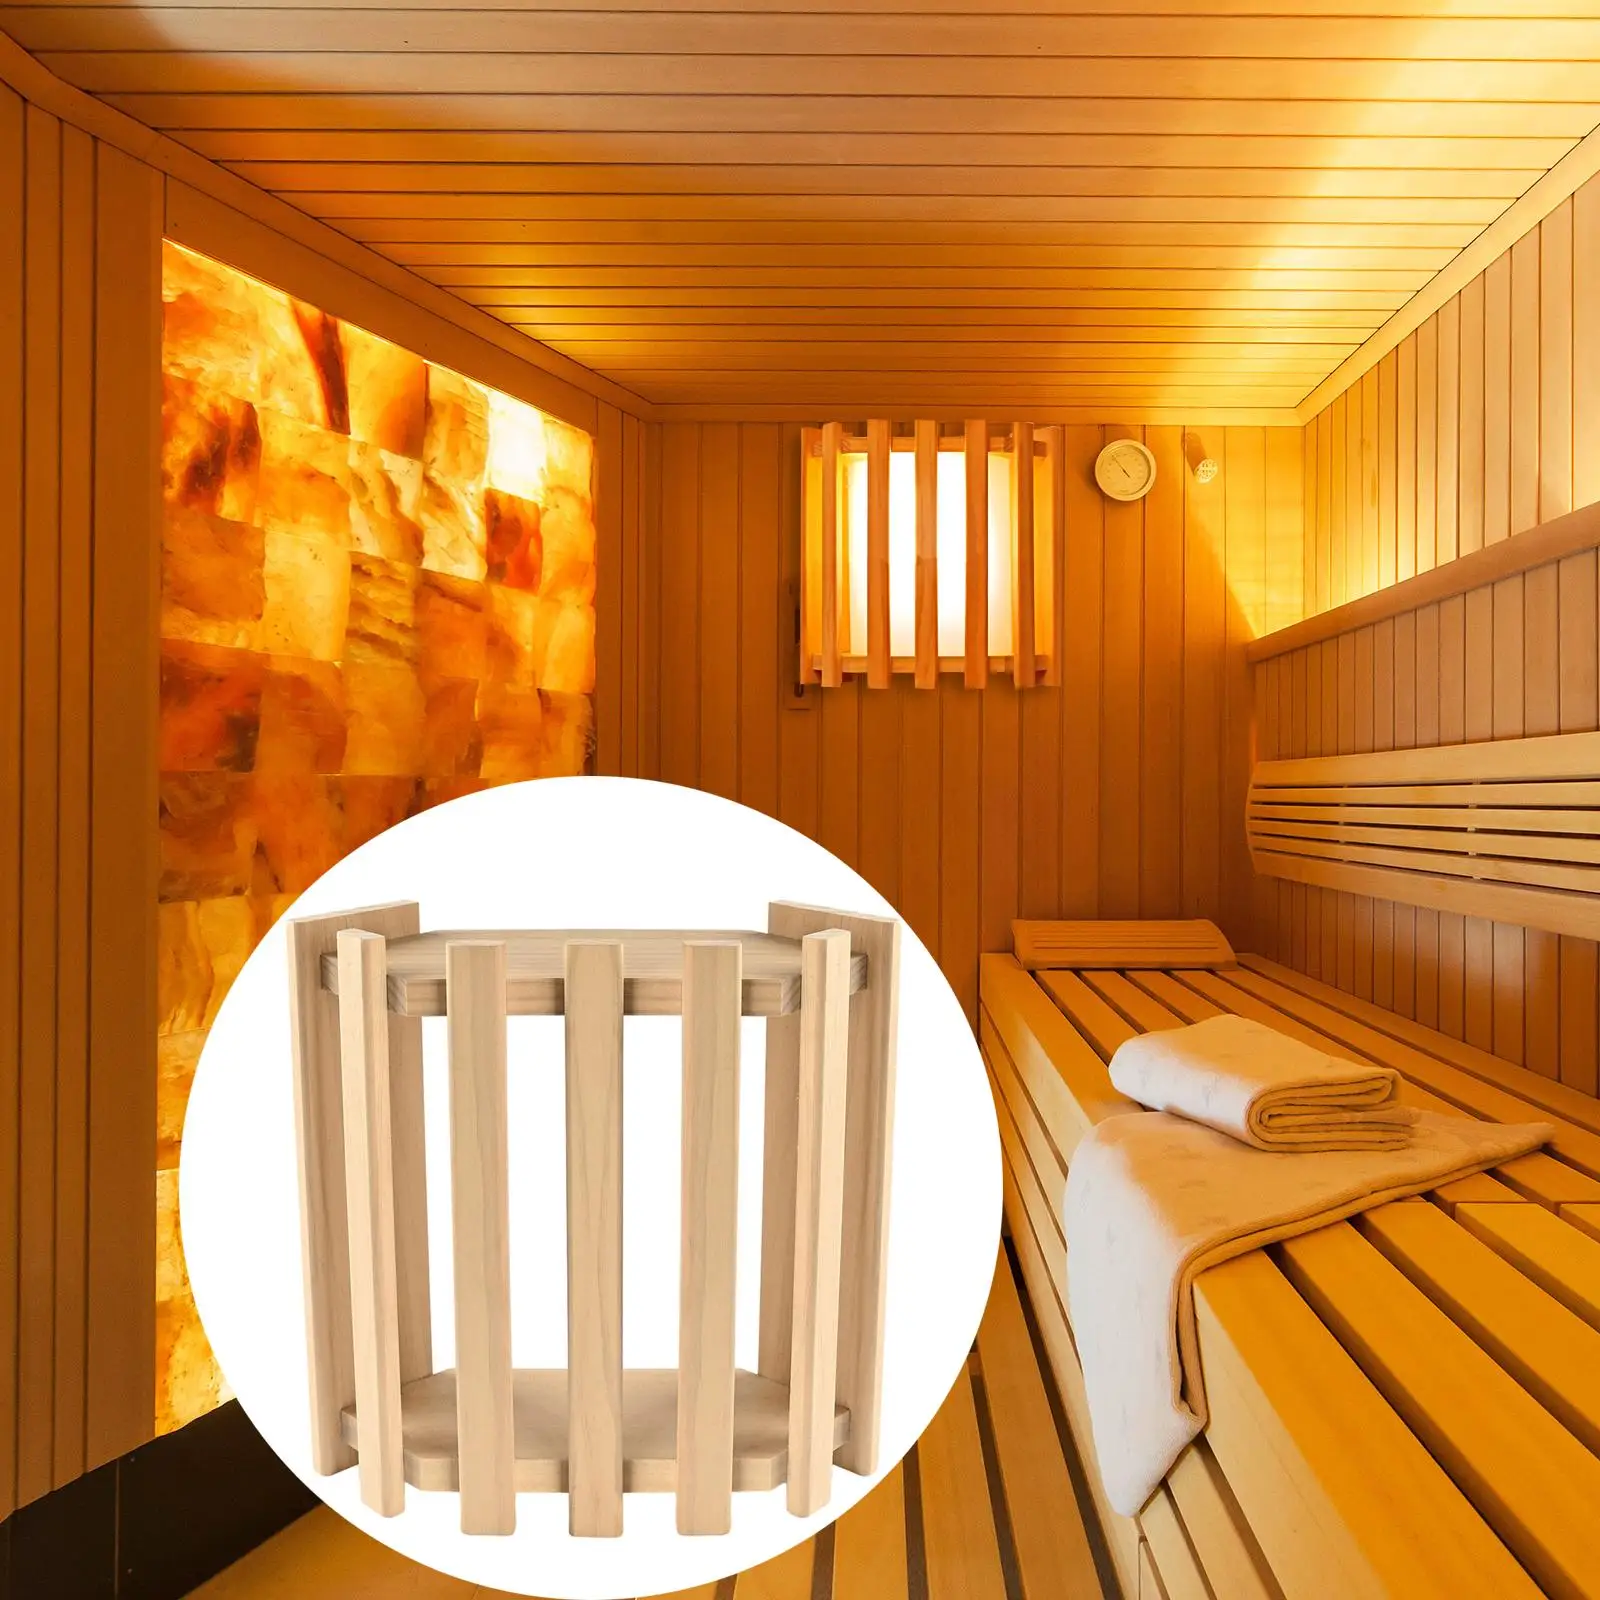 Sauna Room Lamp Shade Steam Room Accessories Steam Room Light Shade for SPA Decor Home Decoration High Temperature Sauna Rooms